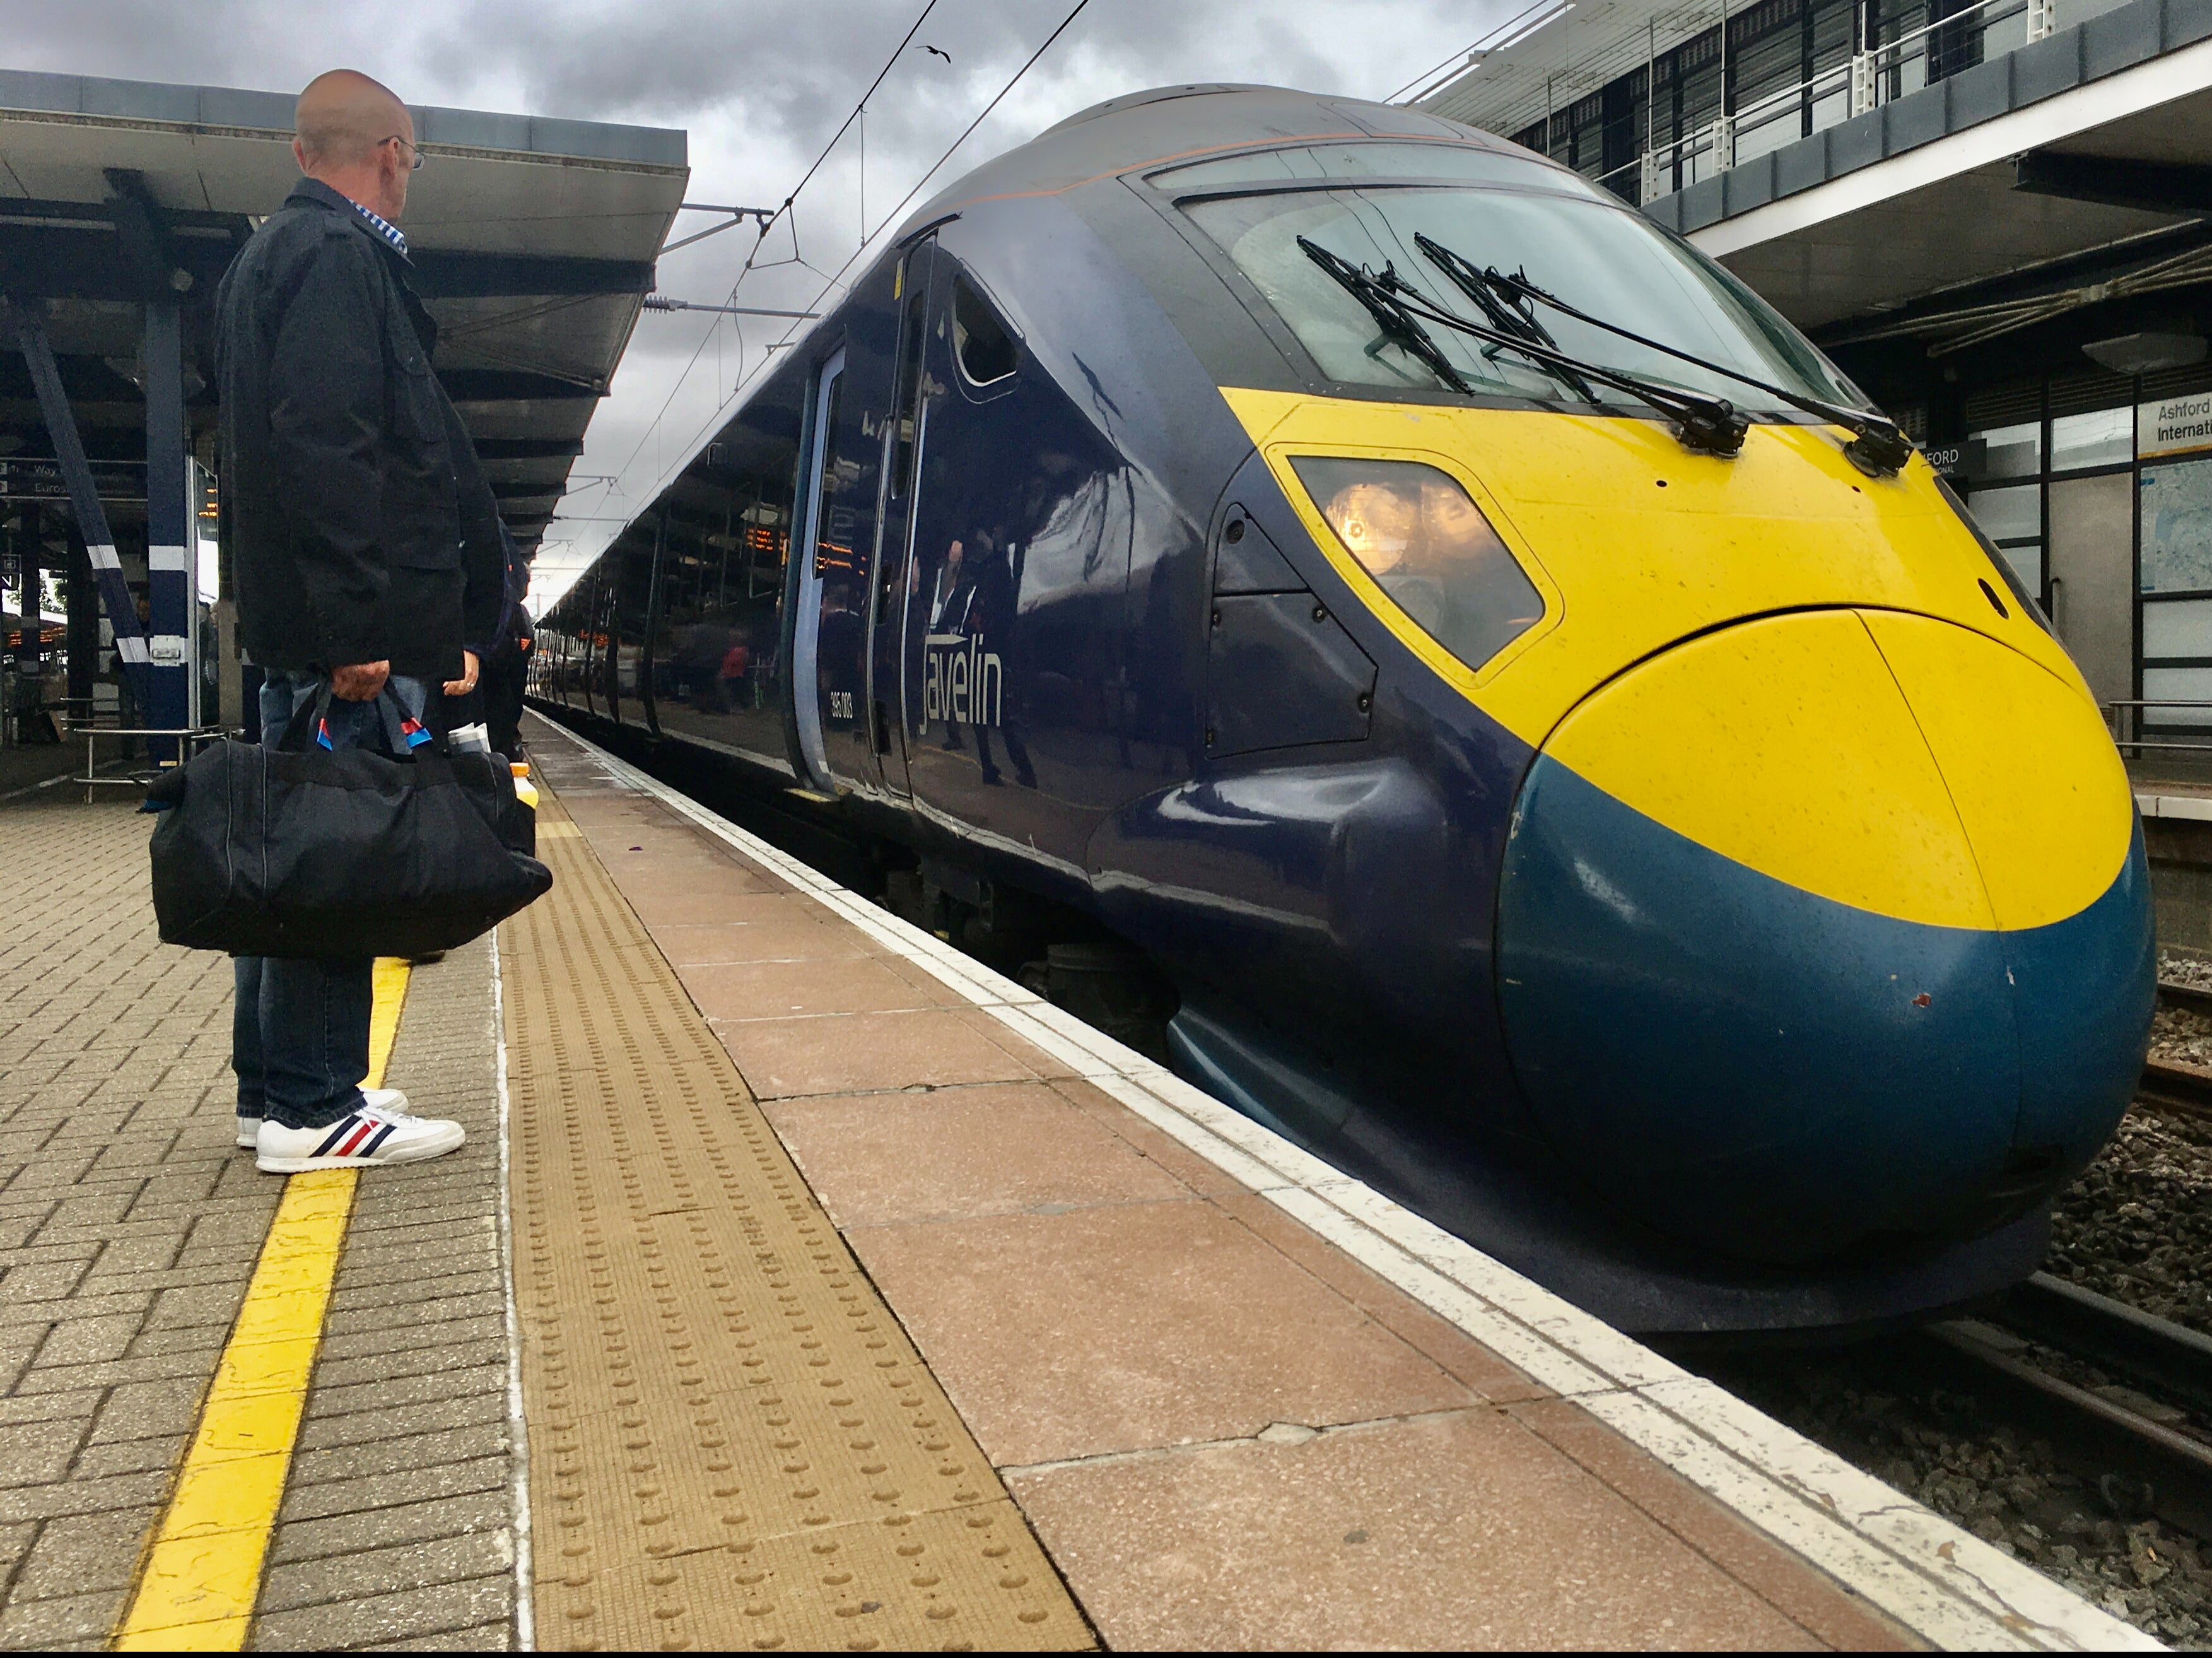 One of Southeastern’s high-speed Javelin trains at Ashford International station in Kent